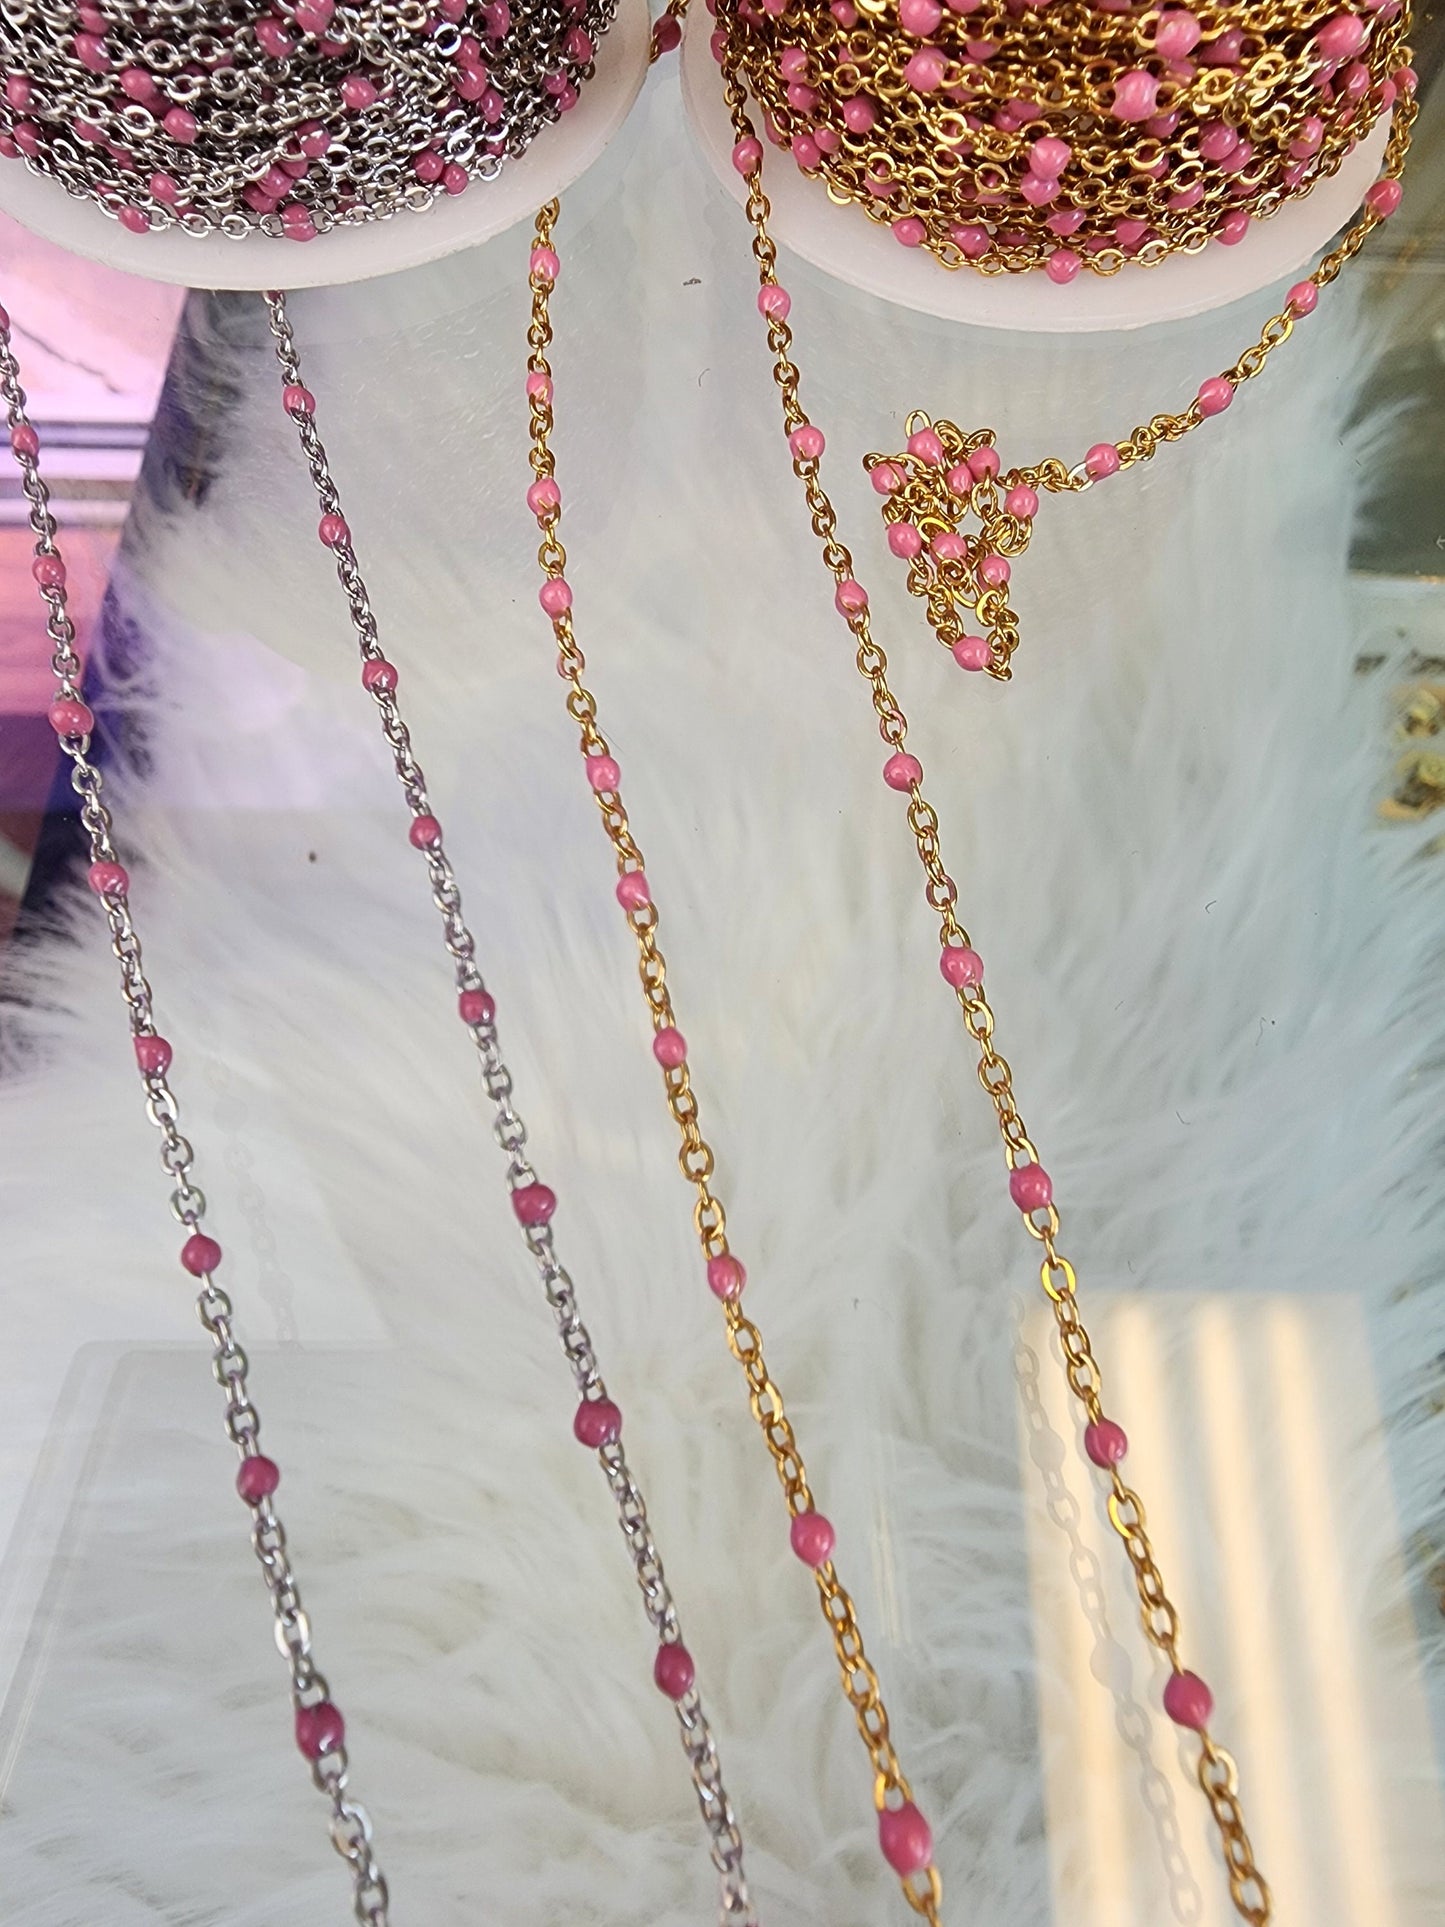 Pretty Pink Enamel Chain multicolor bulk chain chain for permanent jewelry Supply wholesale bead and cable gold or silver